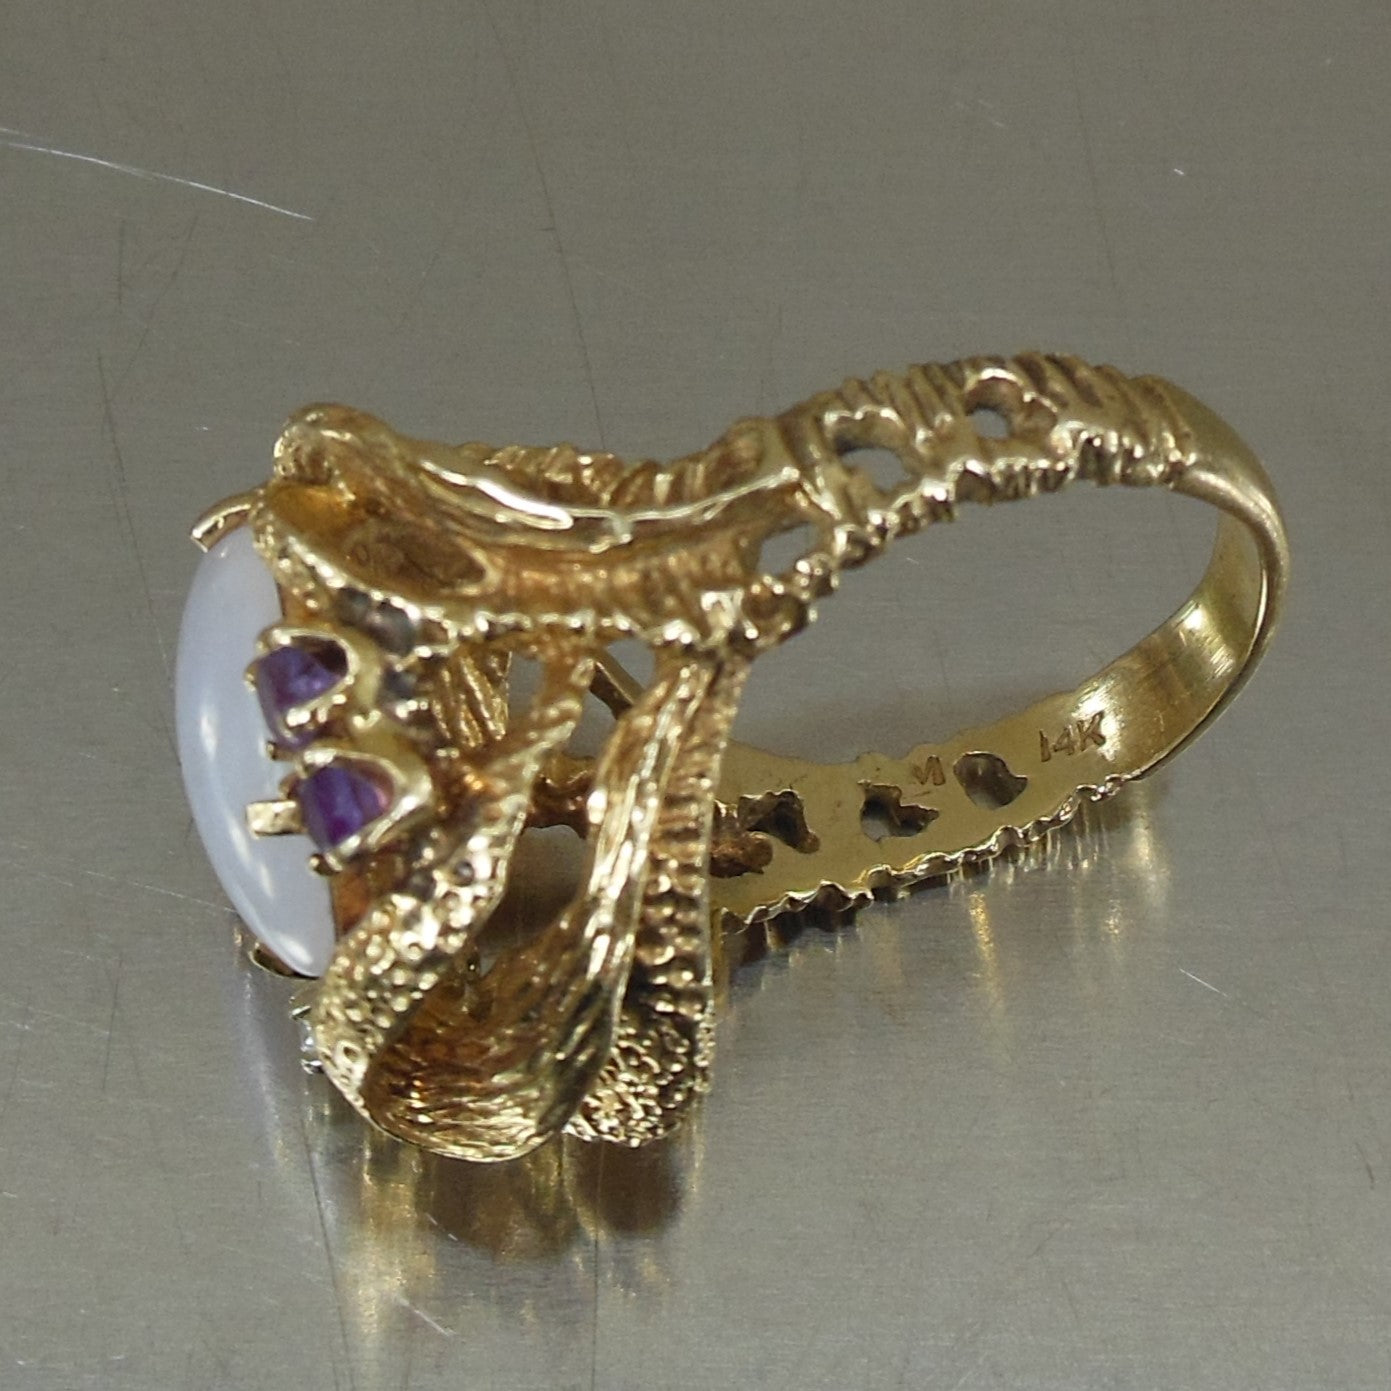 Cocktail Ring Ornate 14K Yellow Gold Amethyst Diamond Cabochon Size 7.75 used